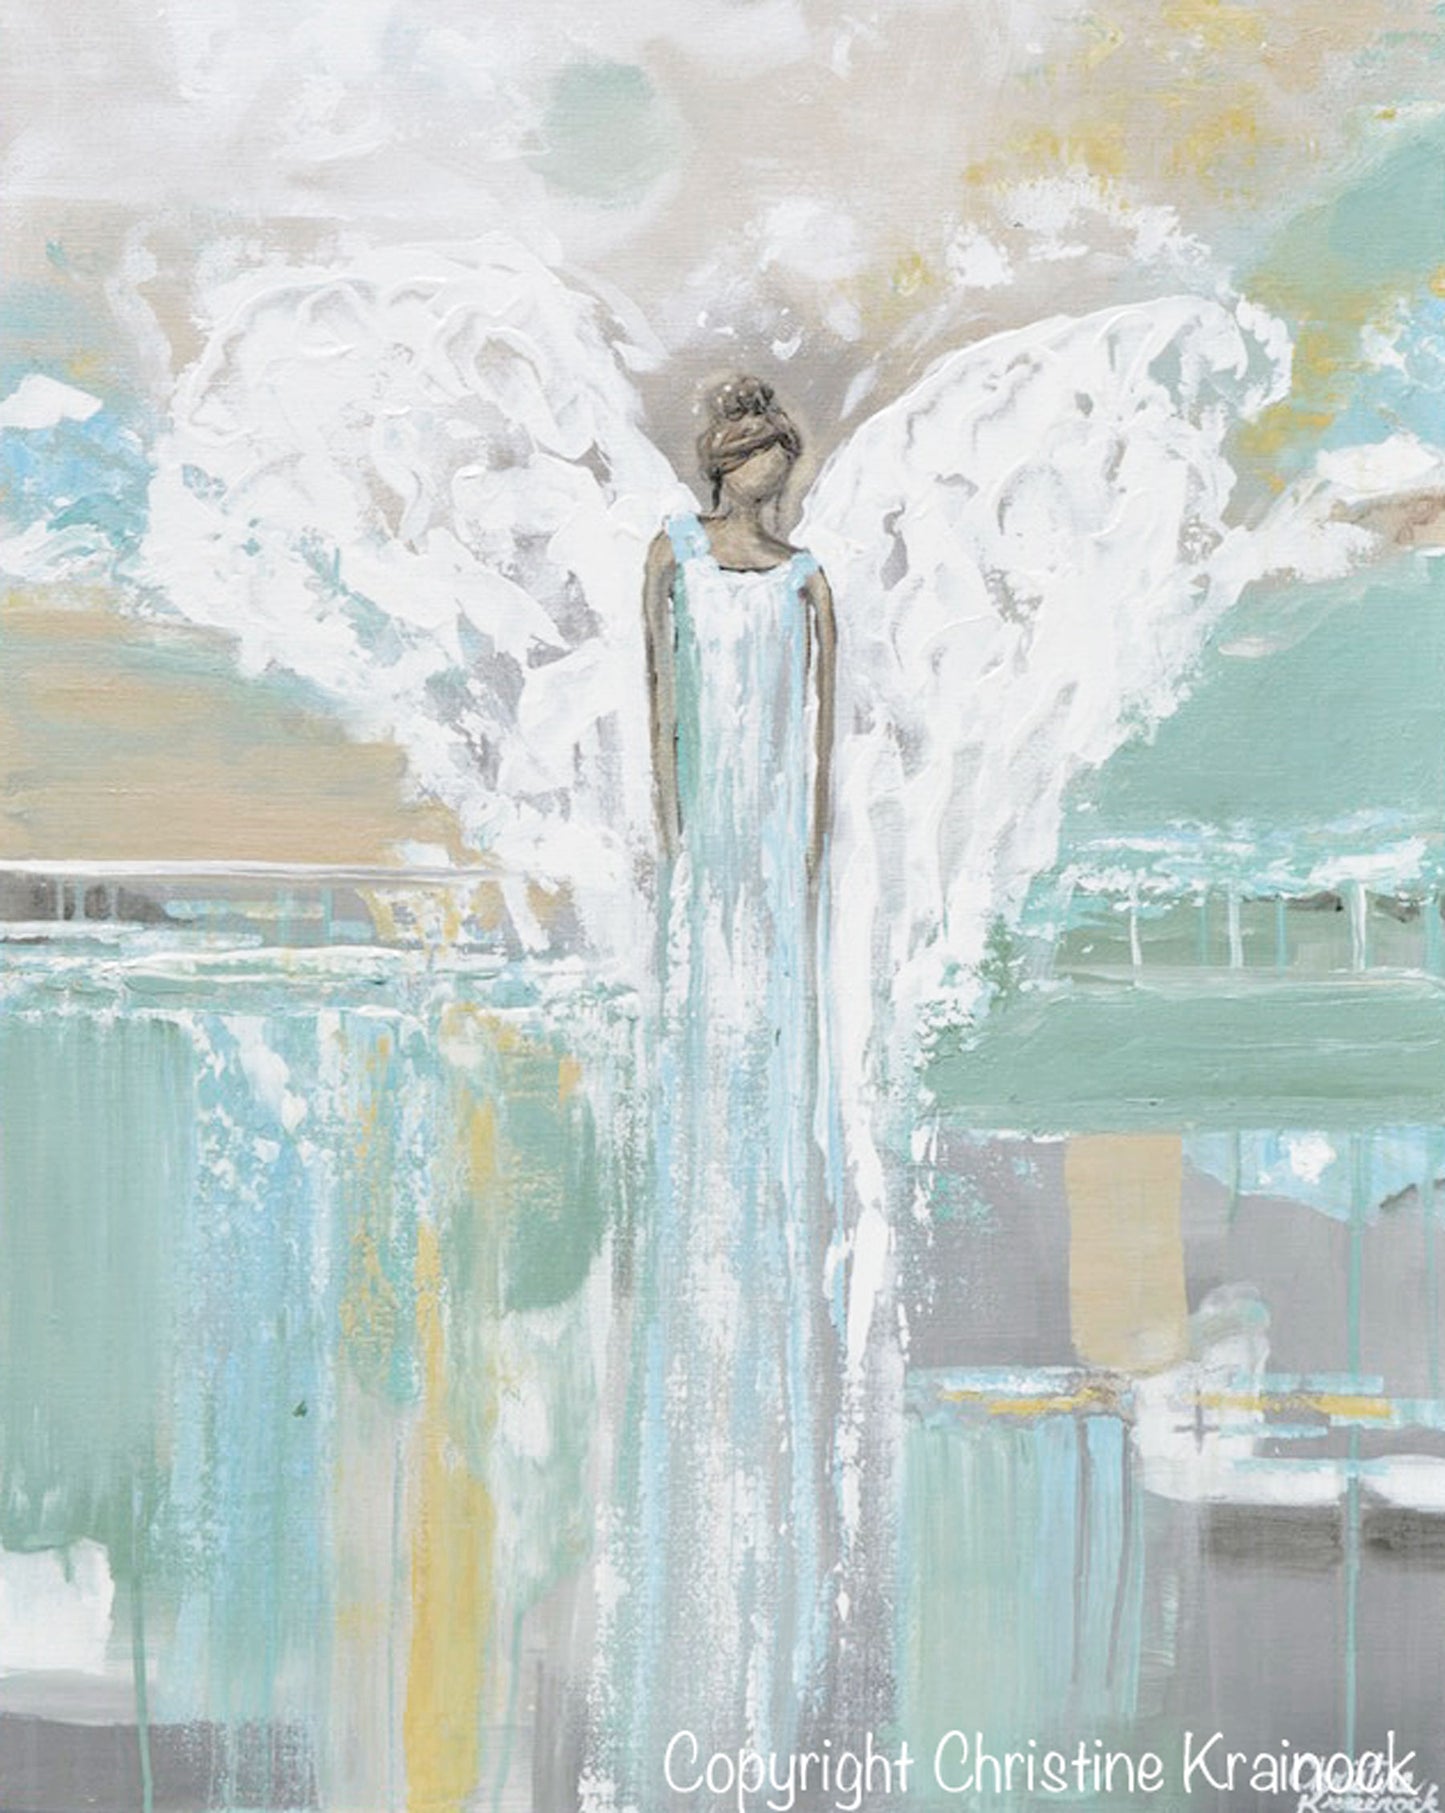 GICLEE PRINT Abstract Angel Painting Blue Green Grey White Angel Fine Art Home Decor Canvas Wall Art